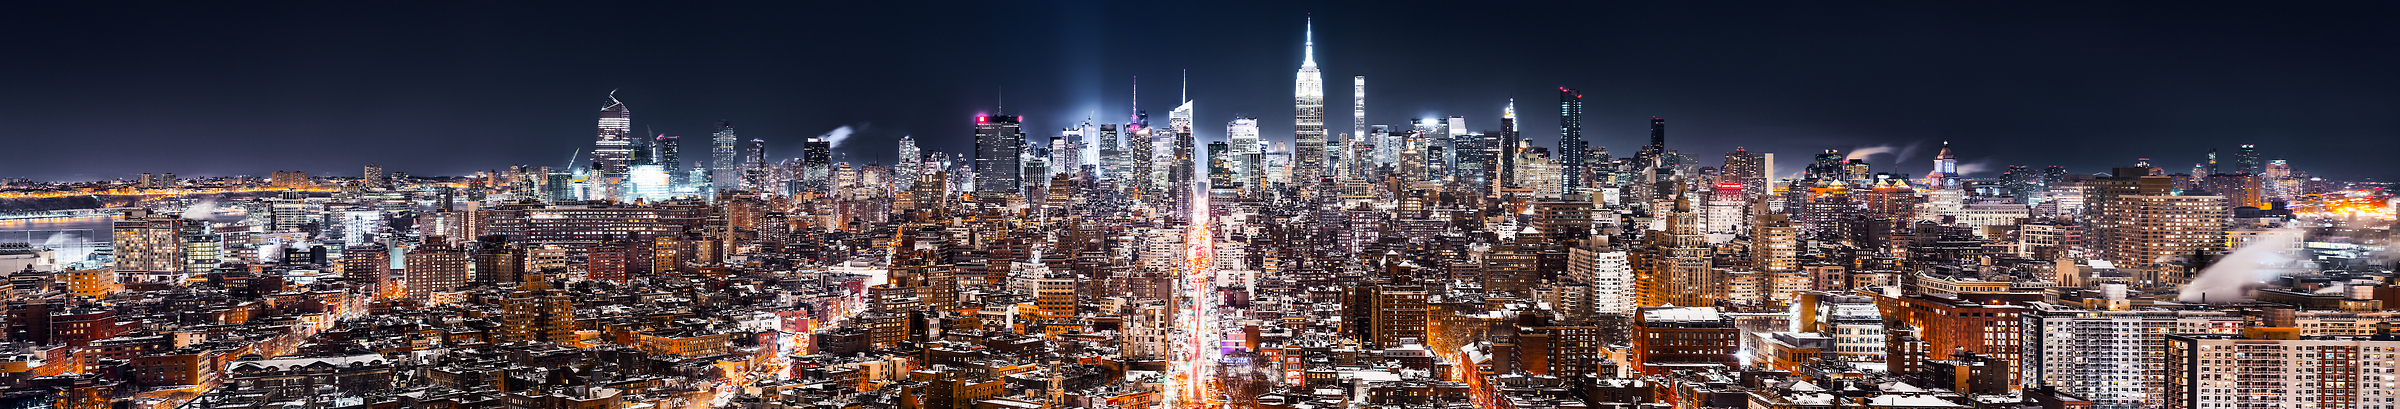 4,636 megapixels! A very high resolution, large-format panorama photo of the New York City skyline at night; cityscape fine art photo created by Dan Piech in Midtown Manhattan, New York City